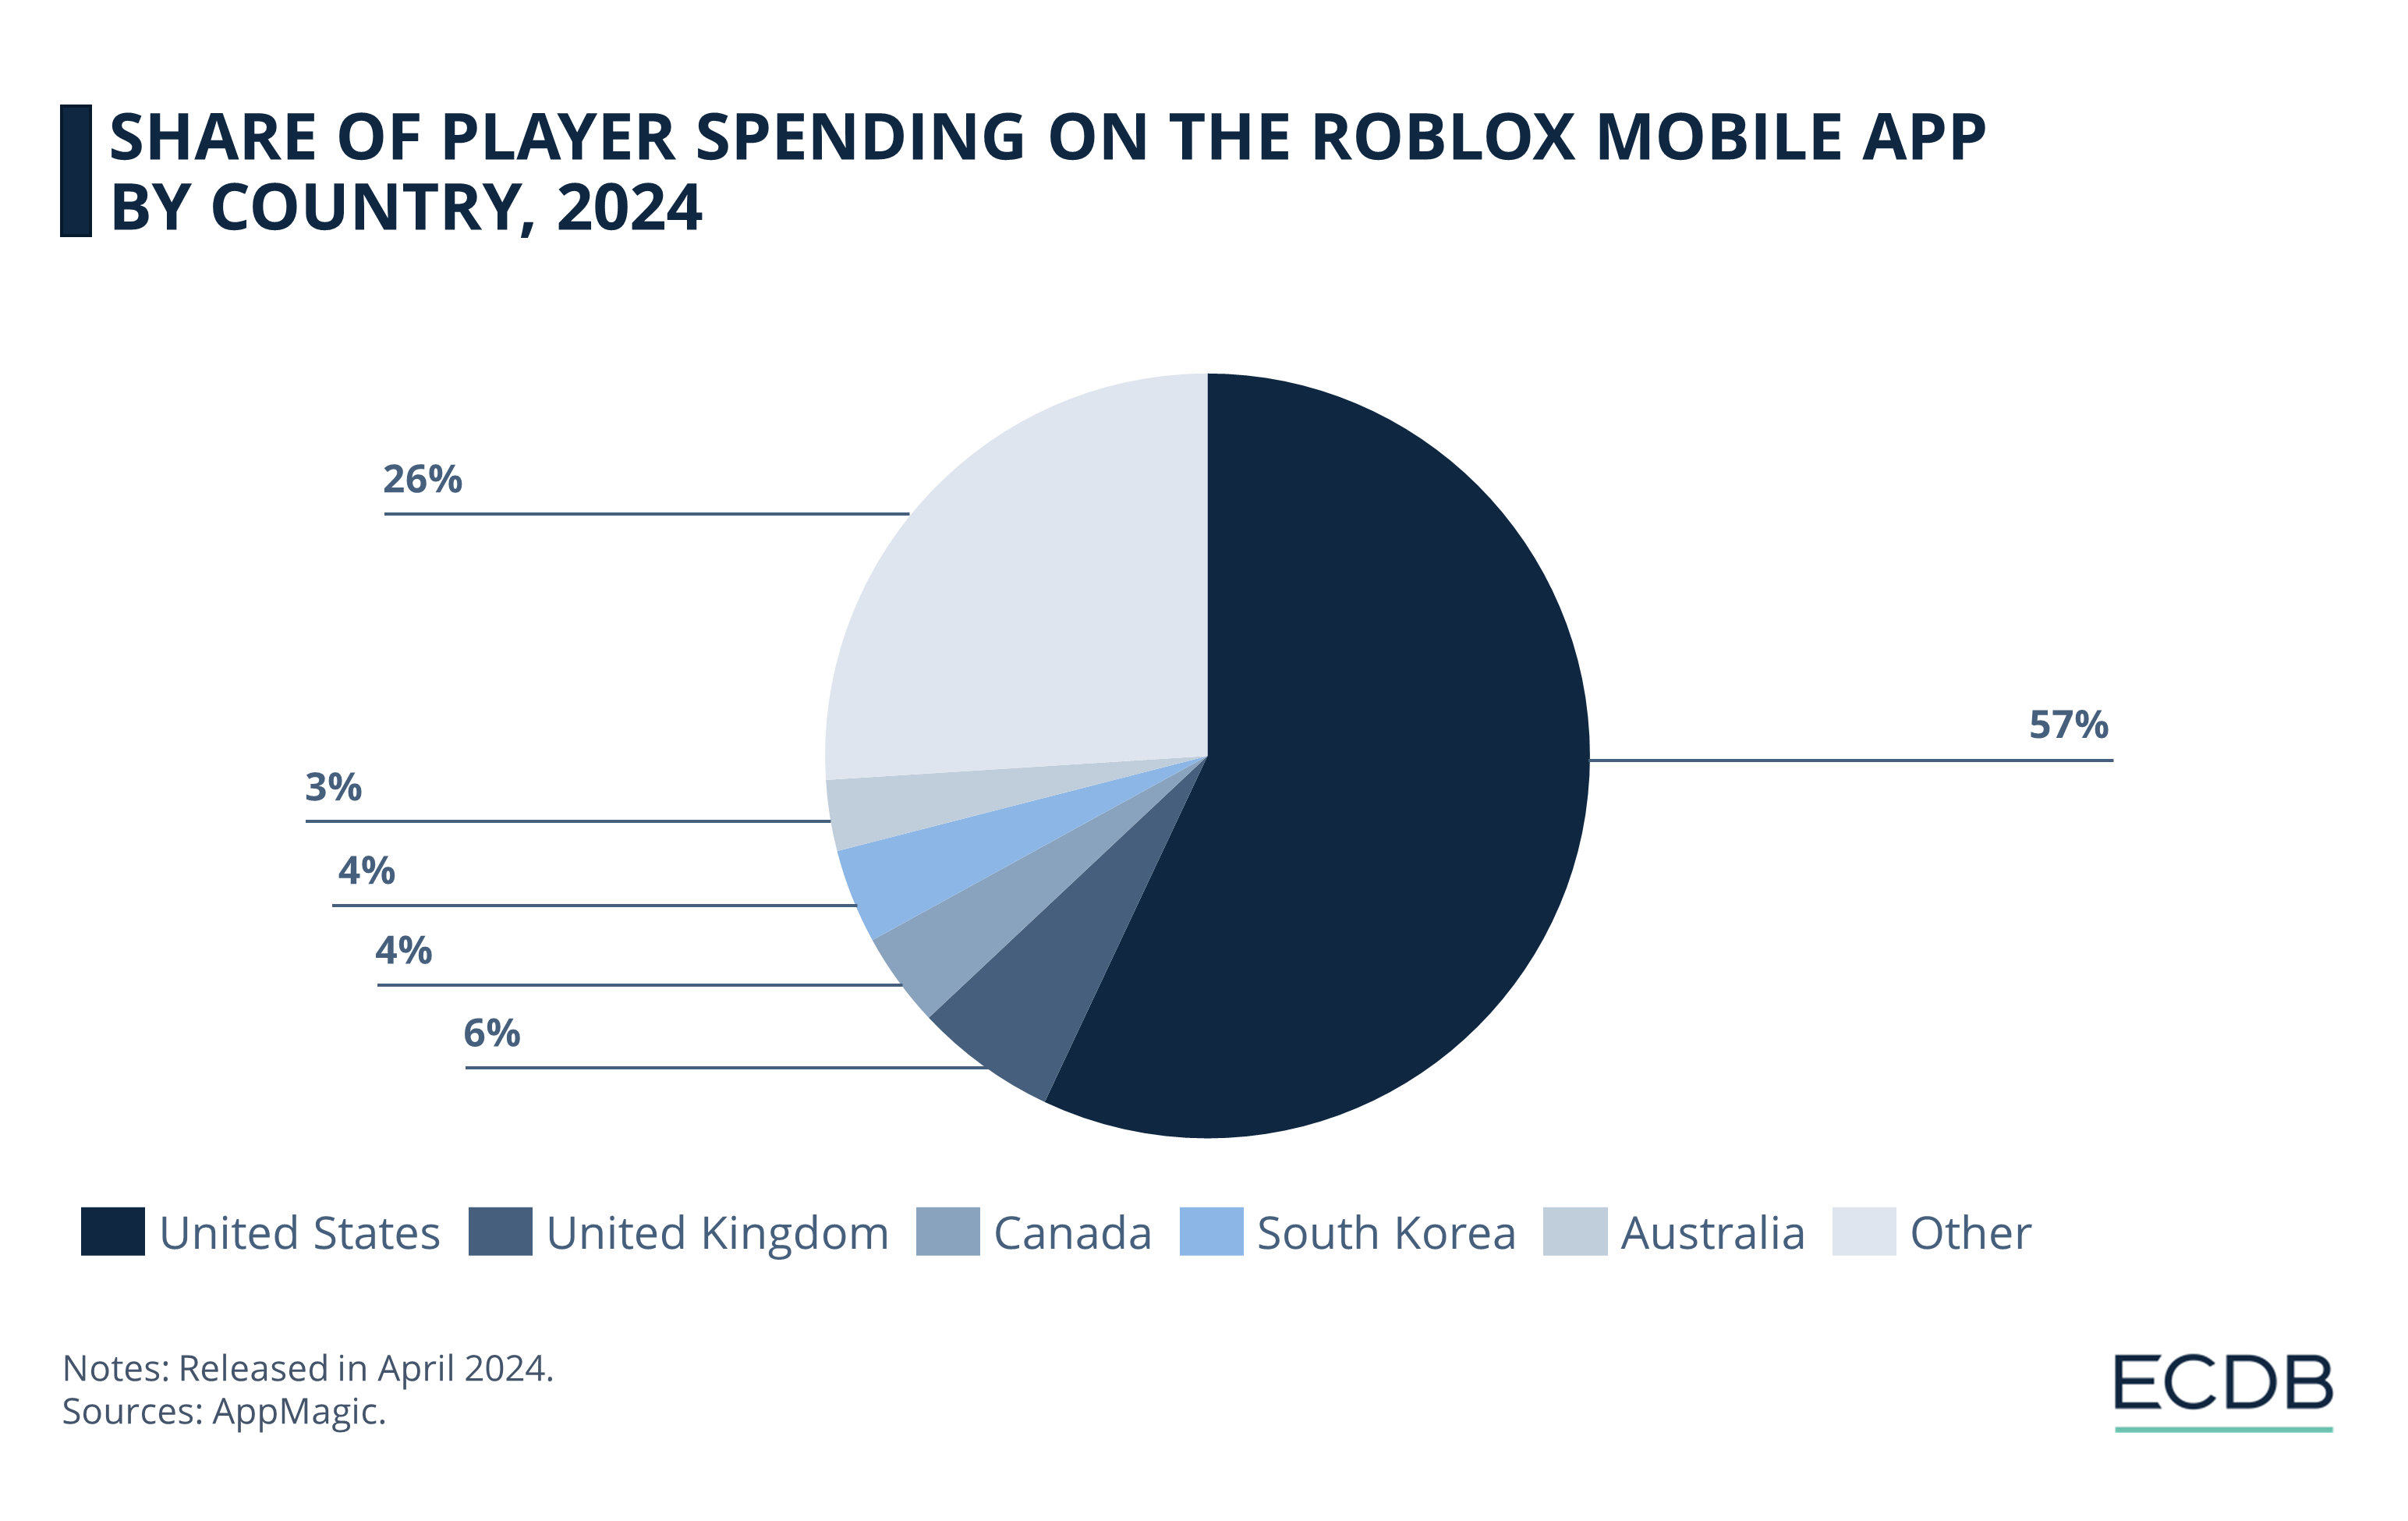 Share of Player Spending on the Roblox Mobile App by Country, 2024